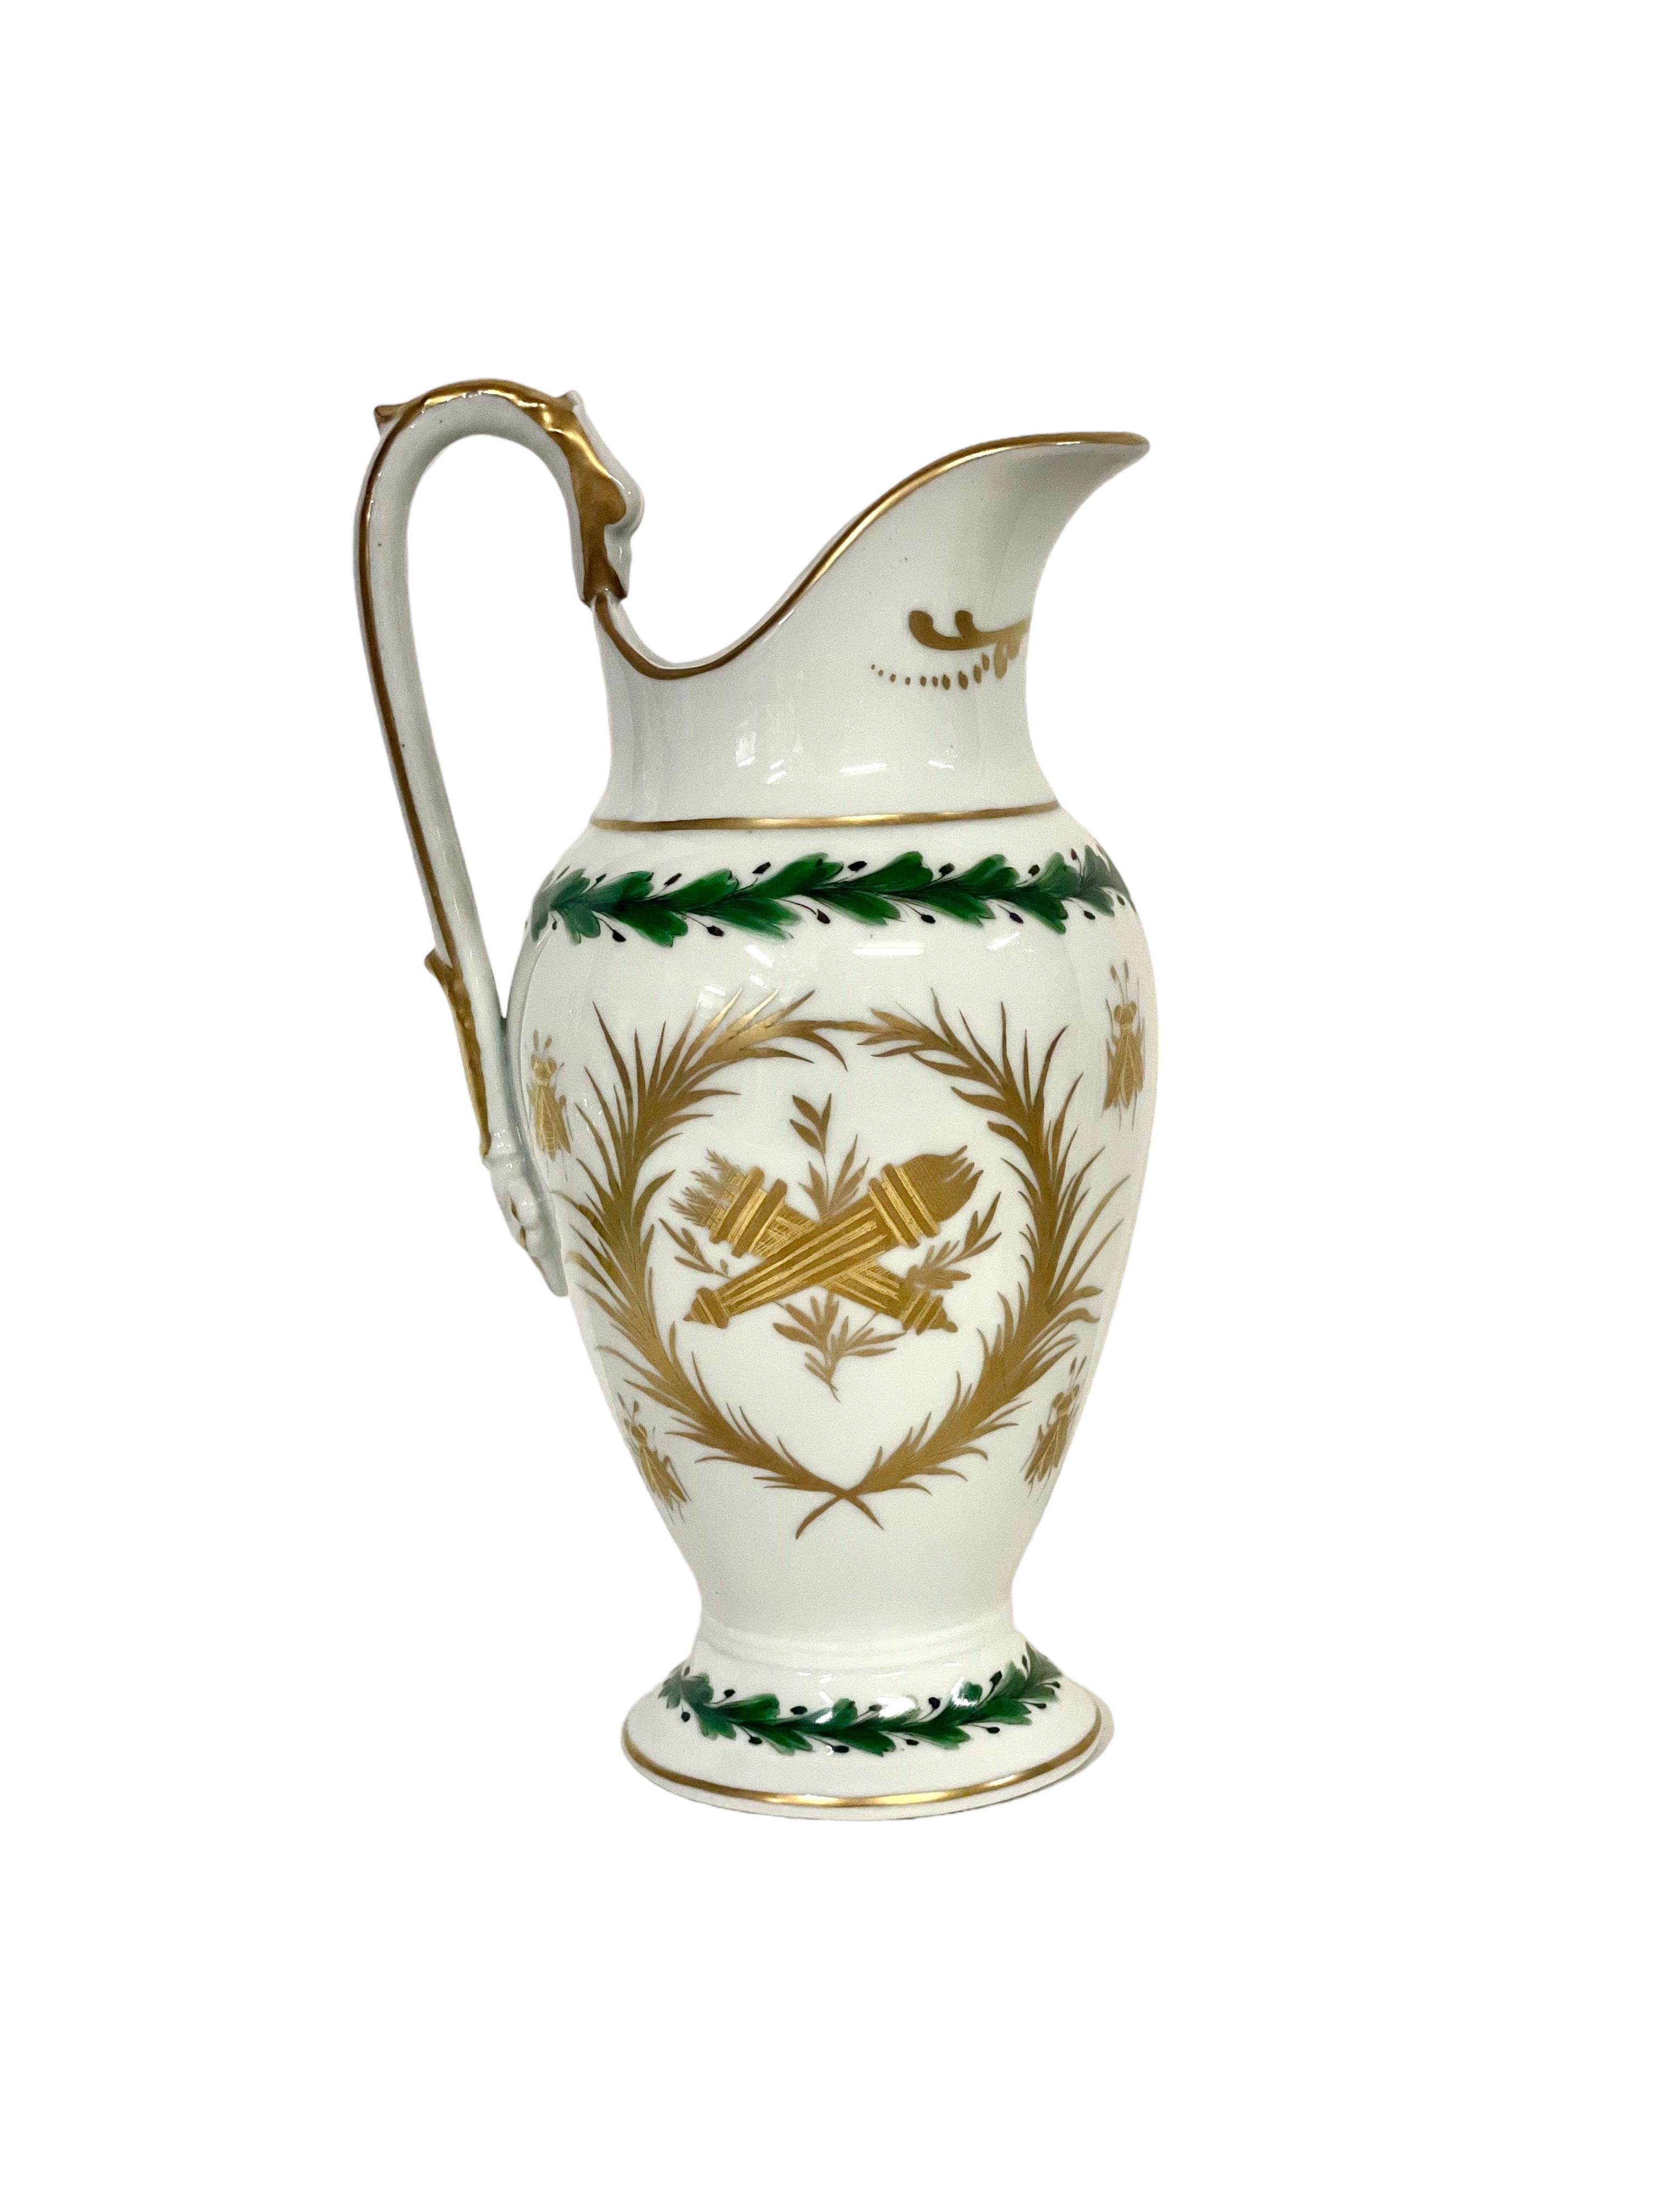 Gilt French Empire Period Paris Porcelain Basin and Pitcher with Napoleonic Emblems For Sale